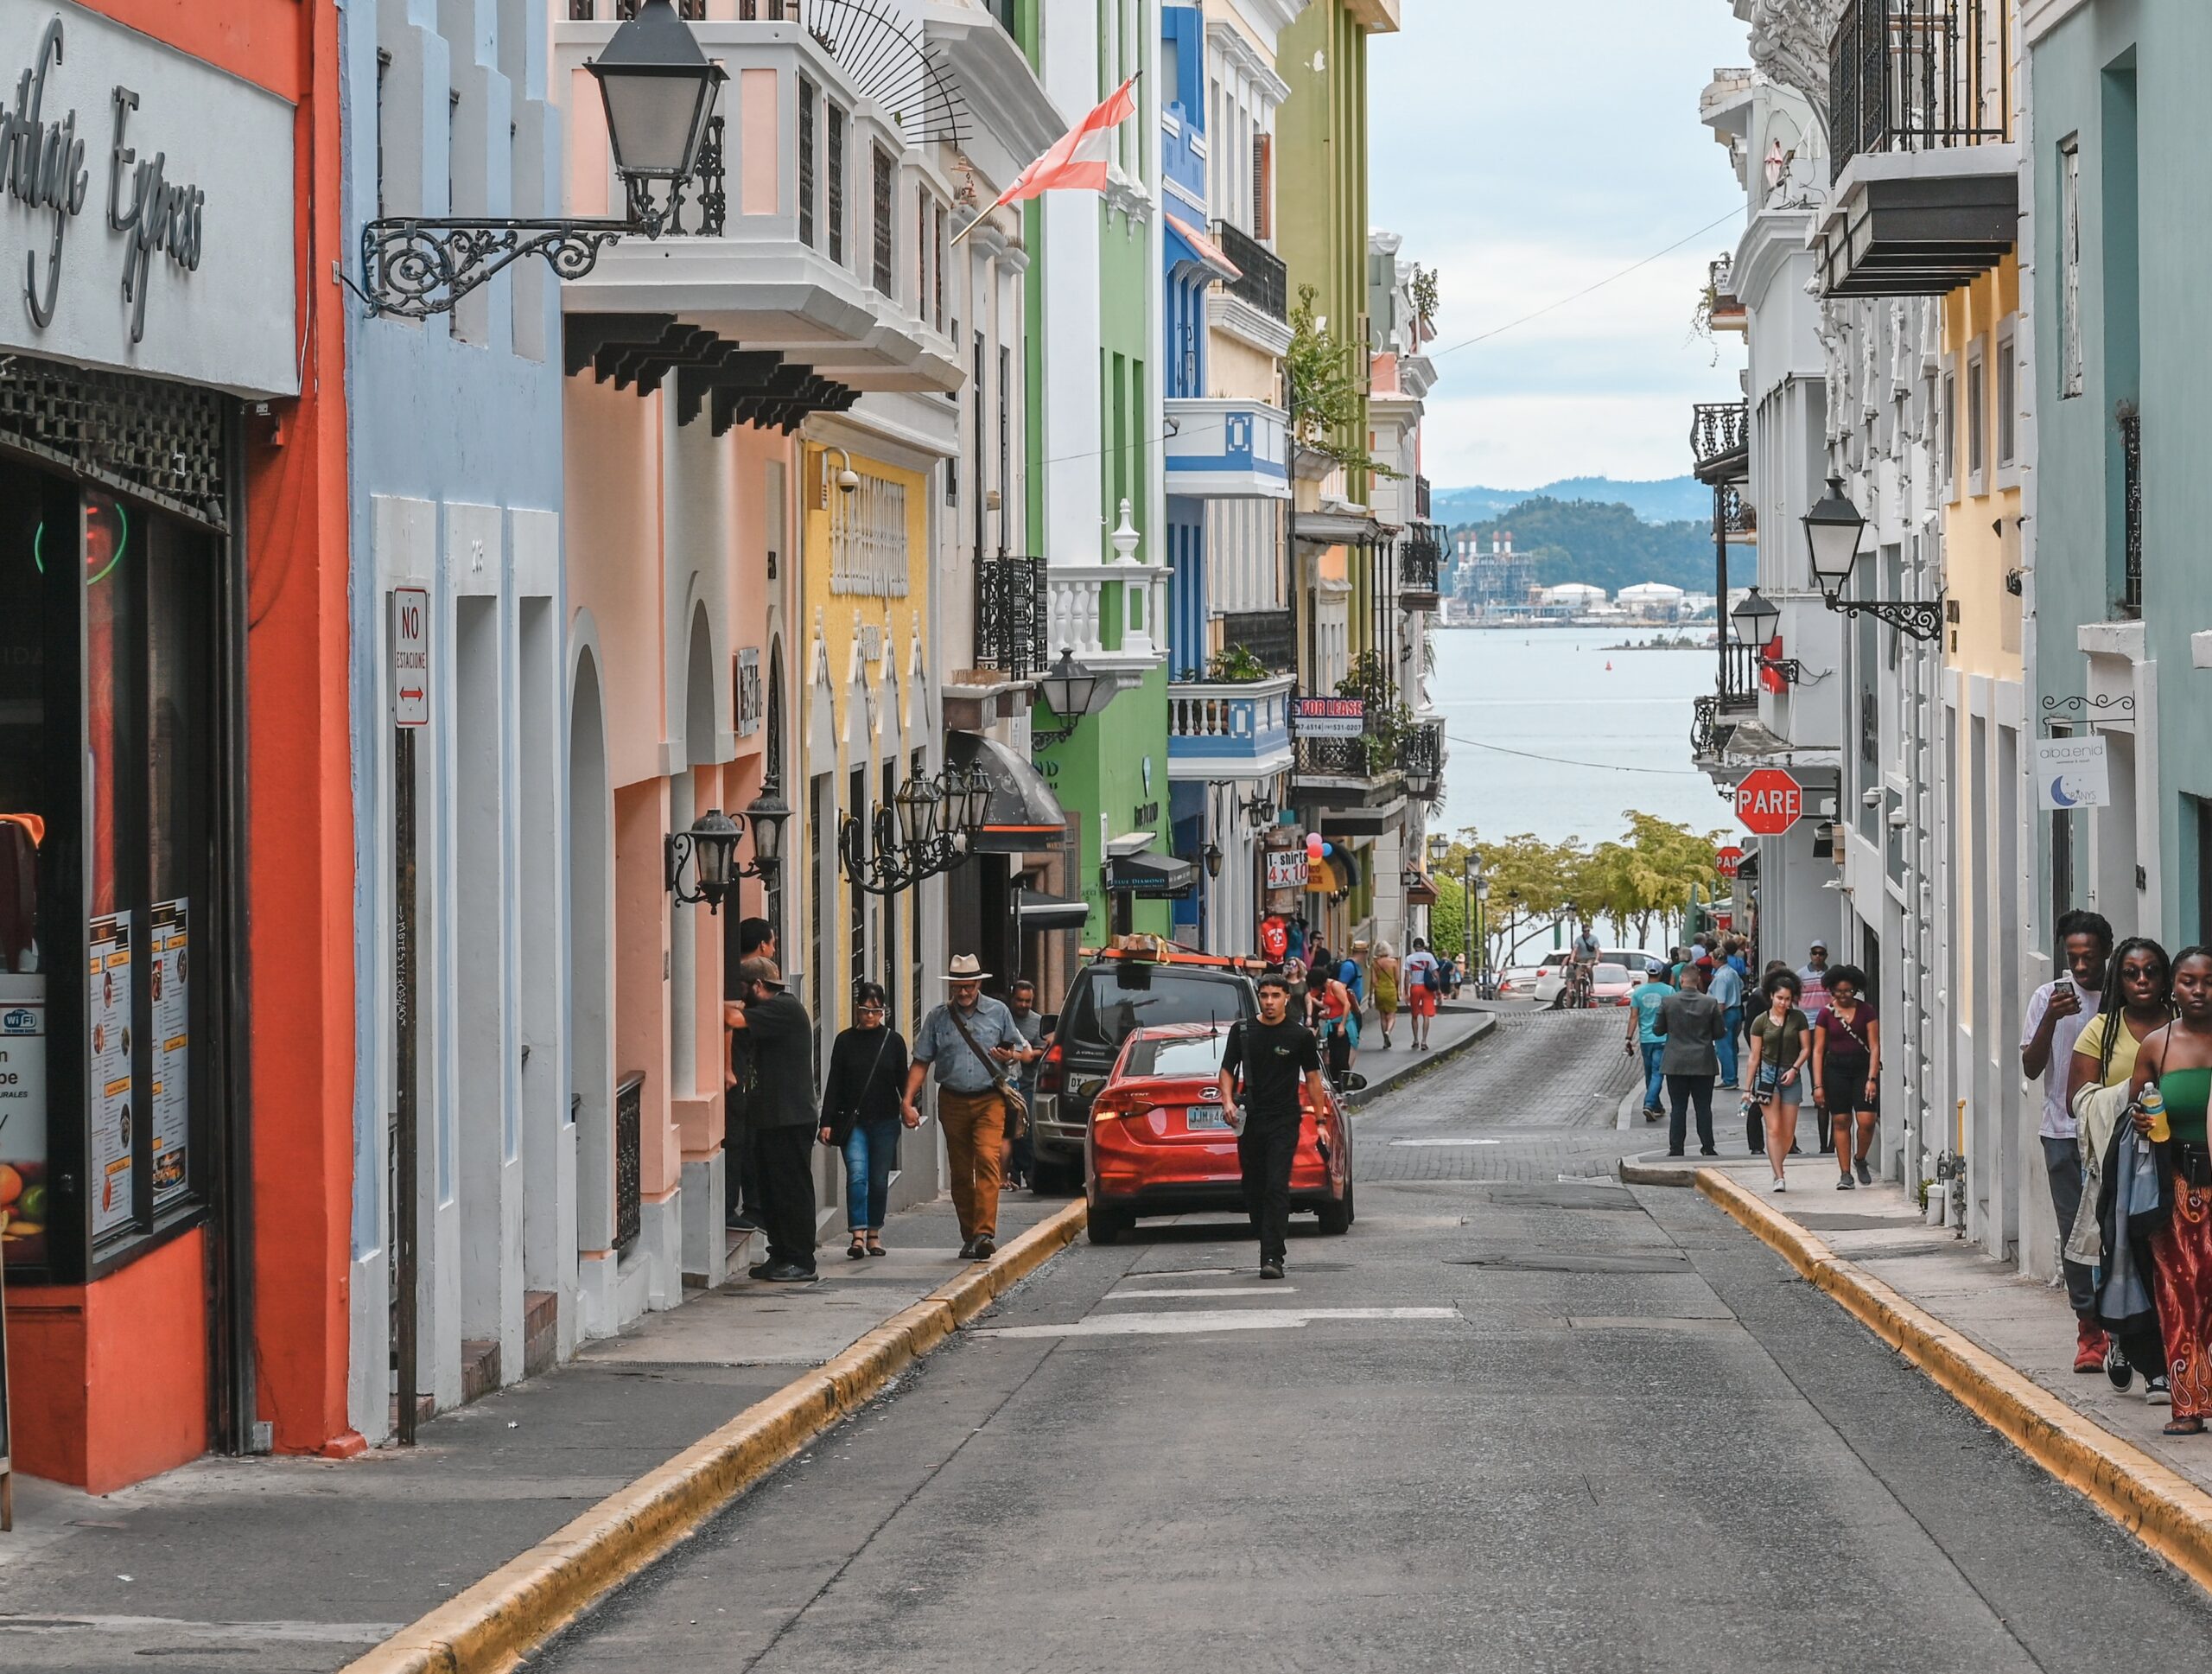 Tourists can rest assured that Puerto Rico is considered pretty safe, Learn more about the few crime concerns for visitors to consider. 
pictured: a bustling street of Puerto Rico with pedestrians and cars passing by 